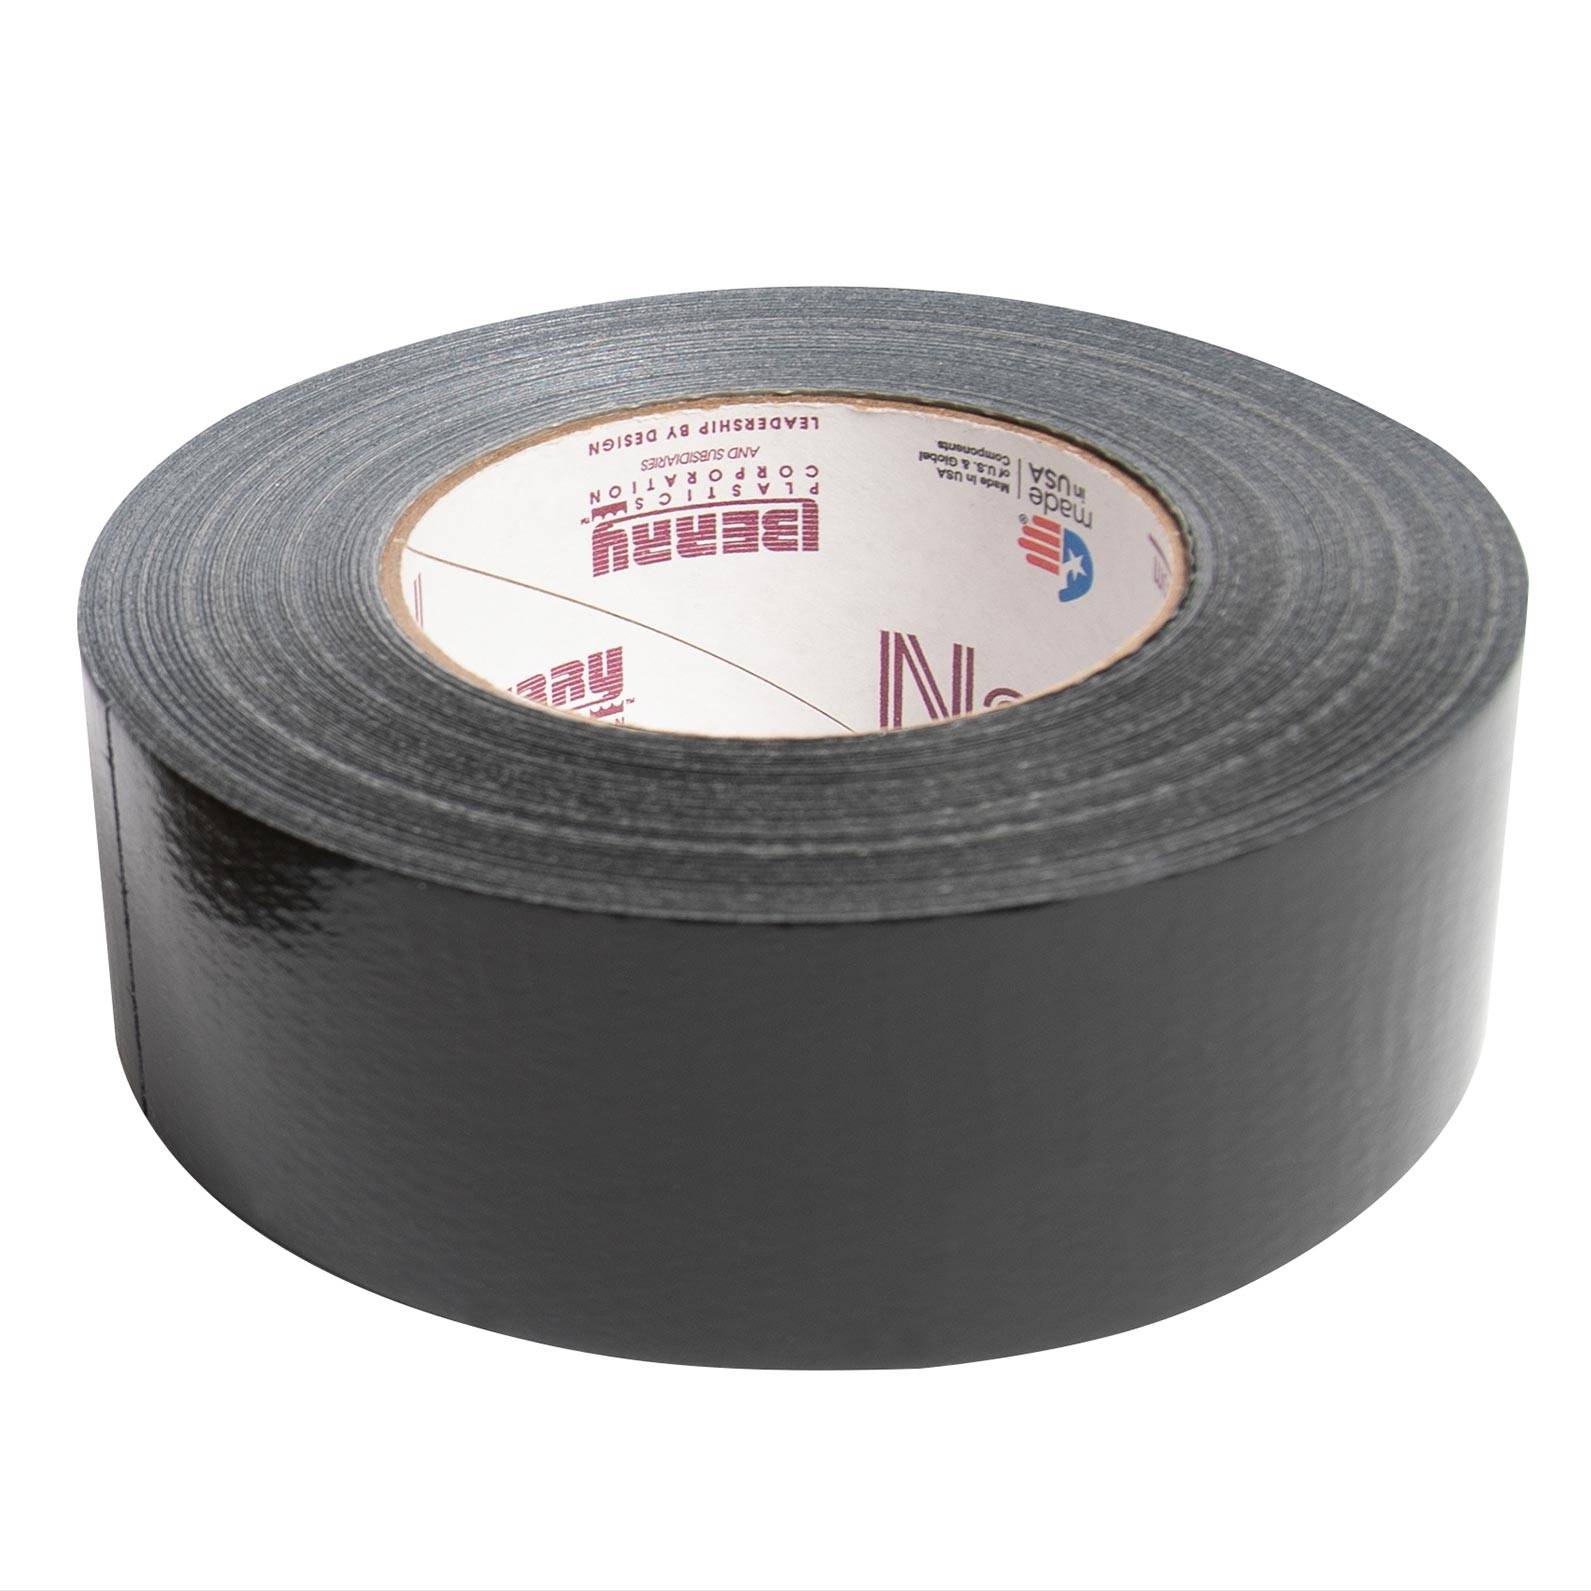 Rothco Military 100 Mph Duct Tape 2'' X 60 Yds